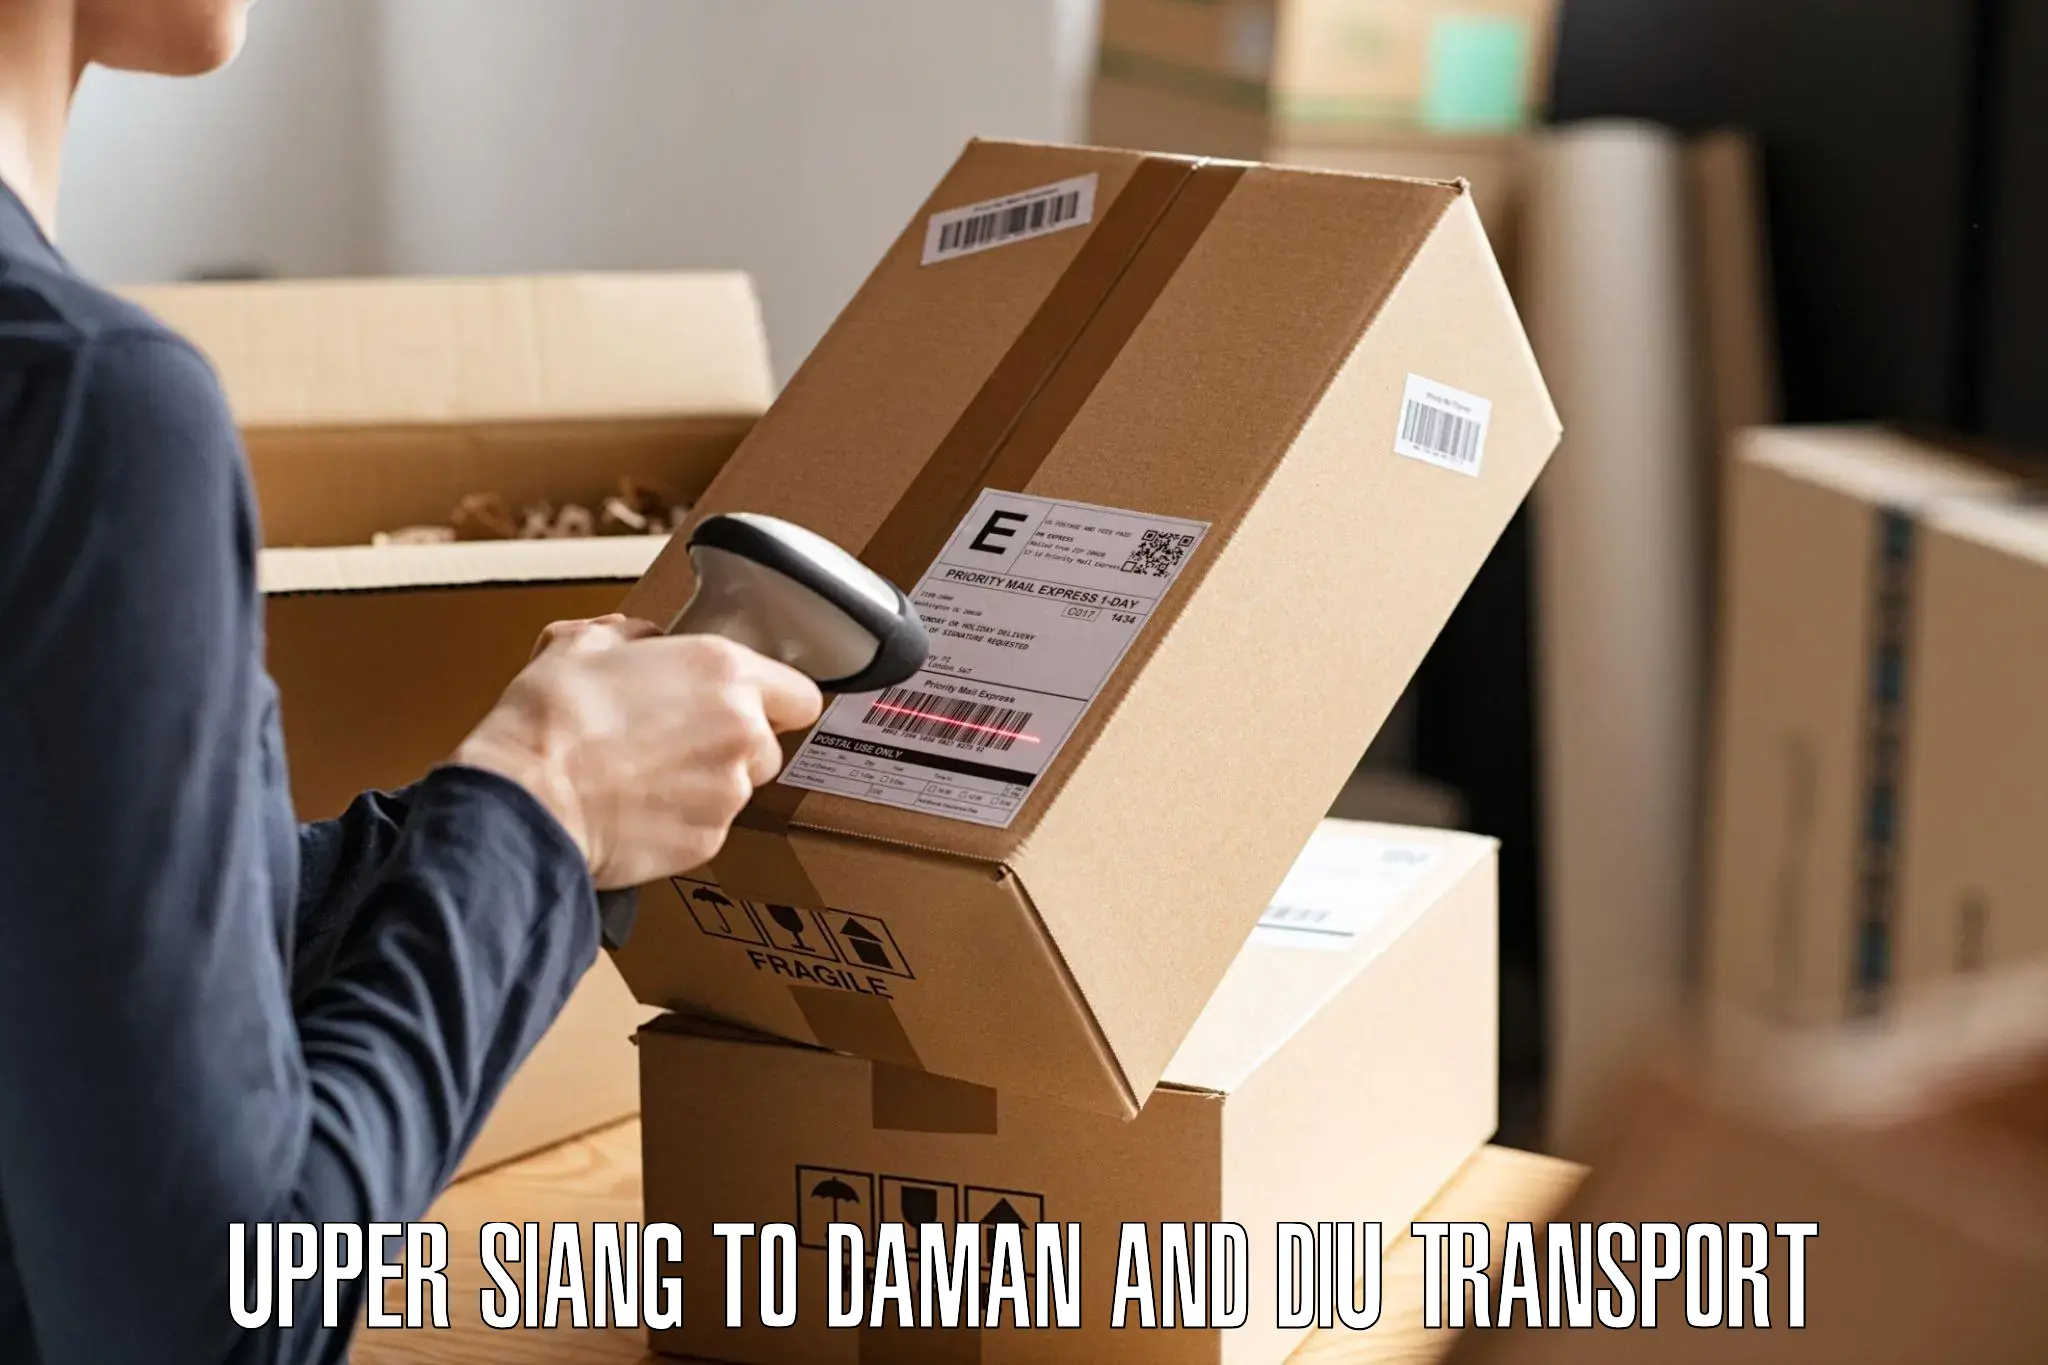 Two wheeler parcel service Upper Siang to Diu